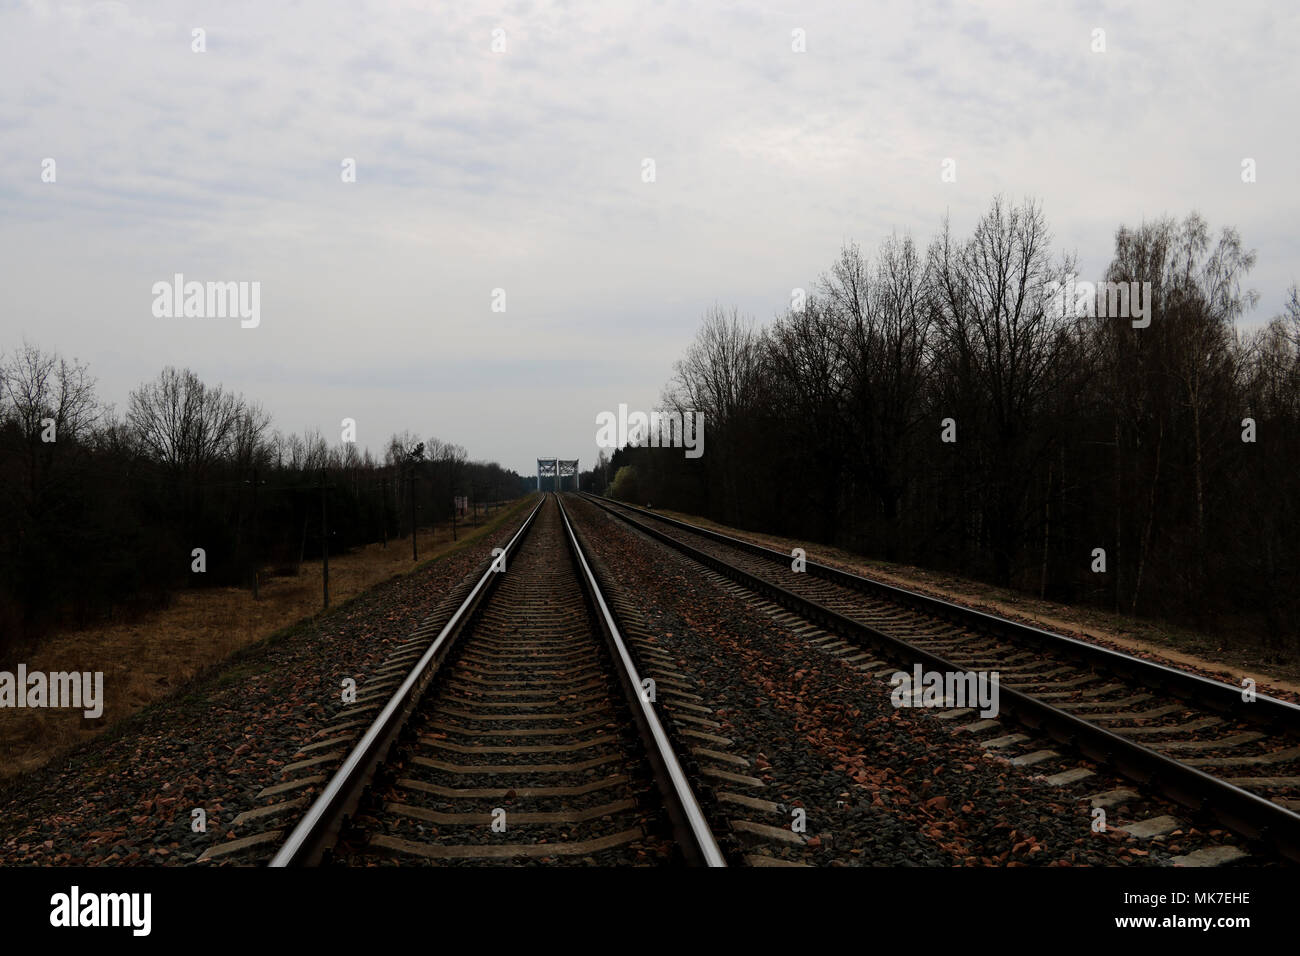 A railway along which trees grow with small clouds. Background Stock Photo